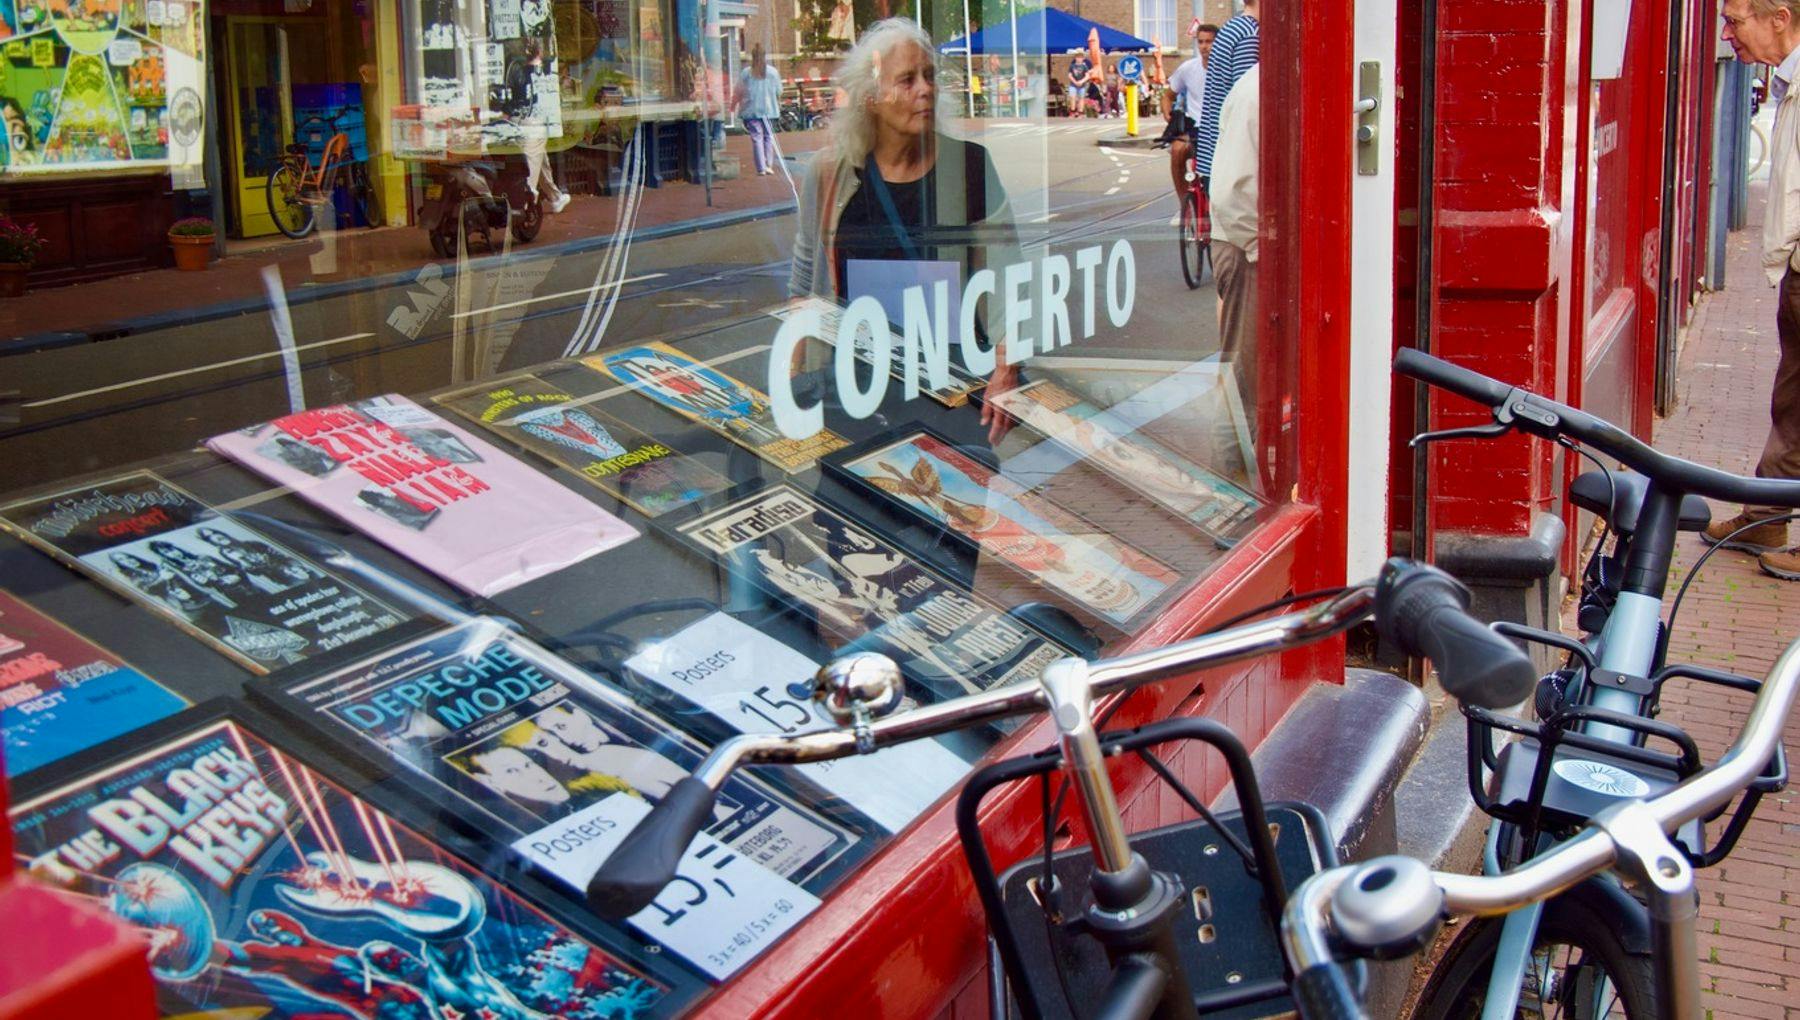 bikes and outside of concerto records shop